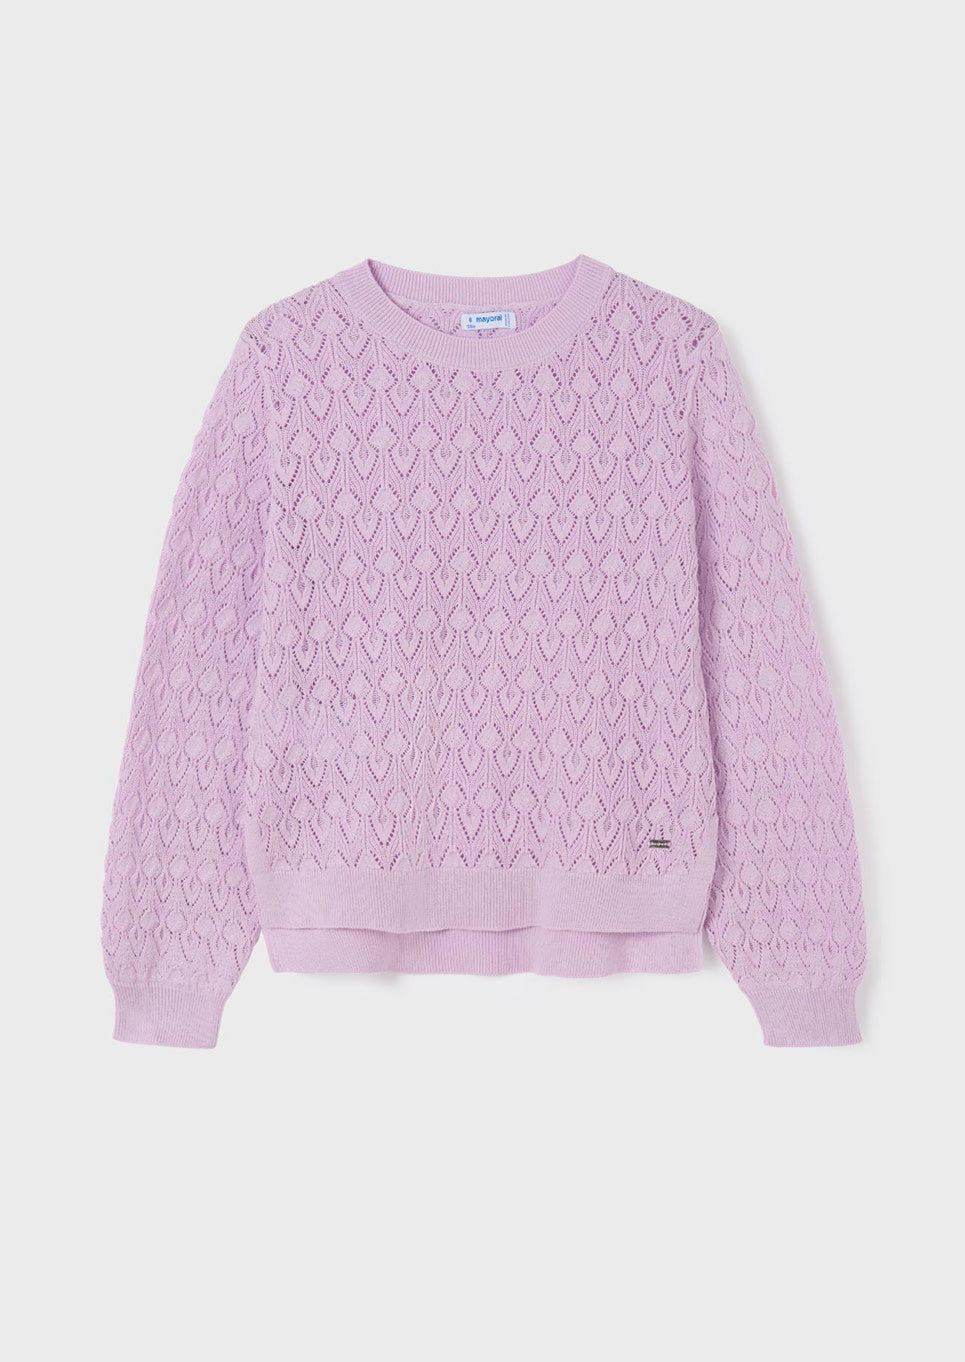 Mayoral Lilac Knit Sweater SP22